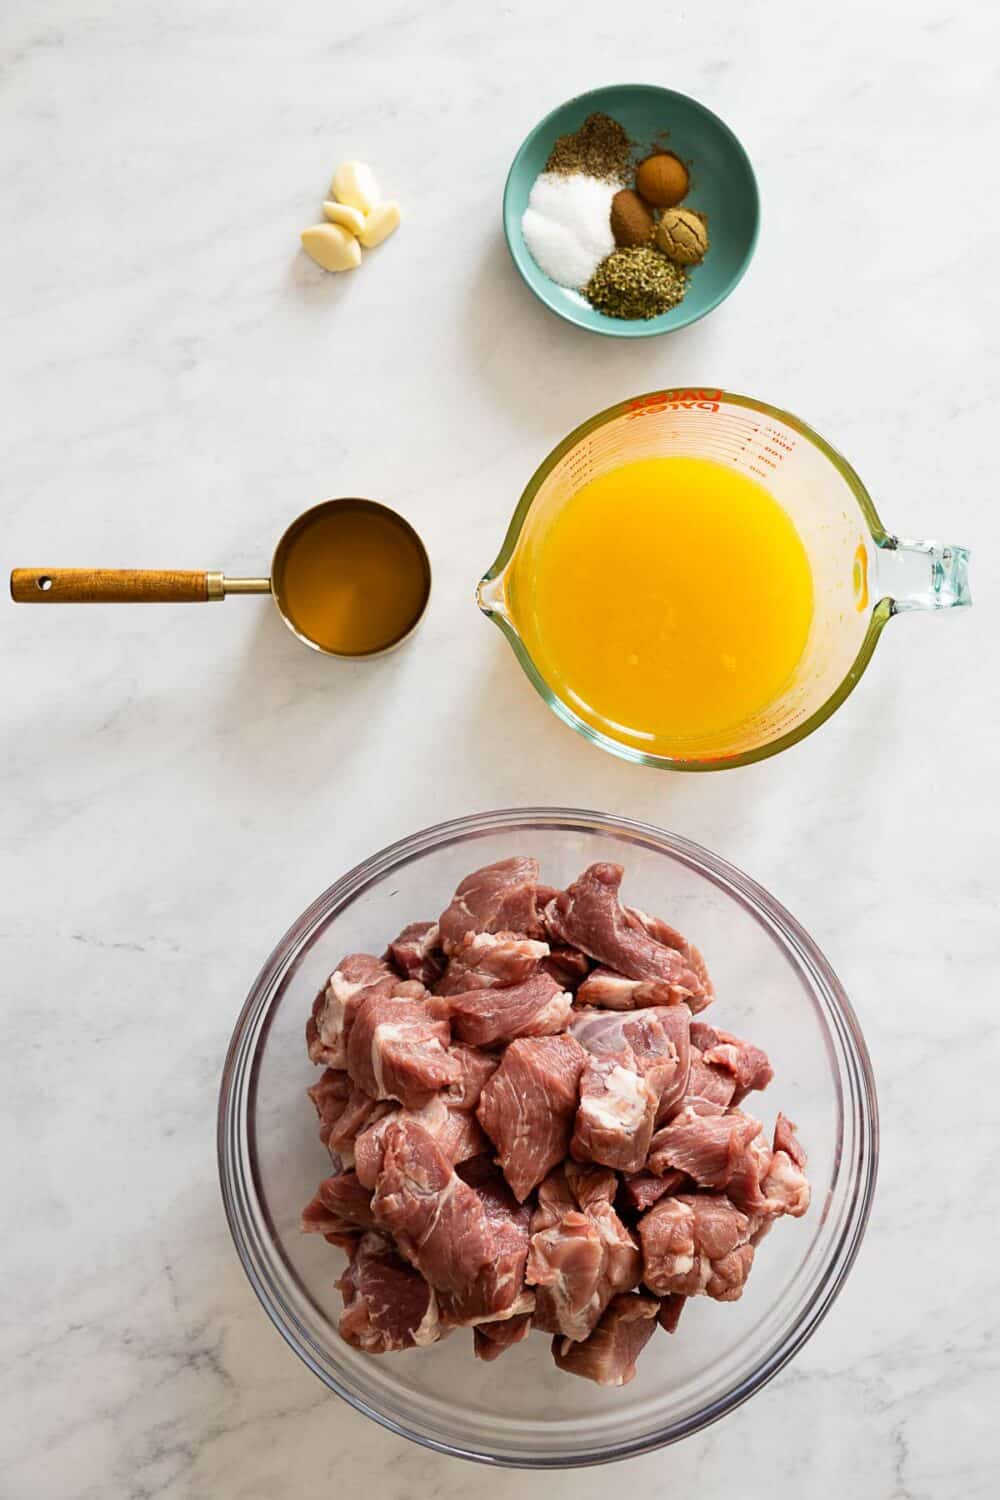 Cubed pork in a bowl, orange juice in a jug, vinegar in a measuring cup, cloves or garlic, spices on a kitchen counter.